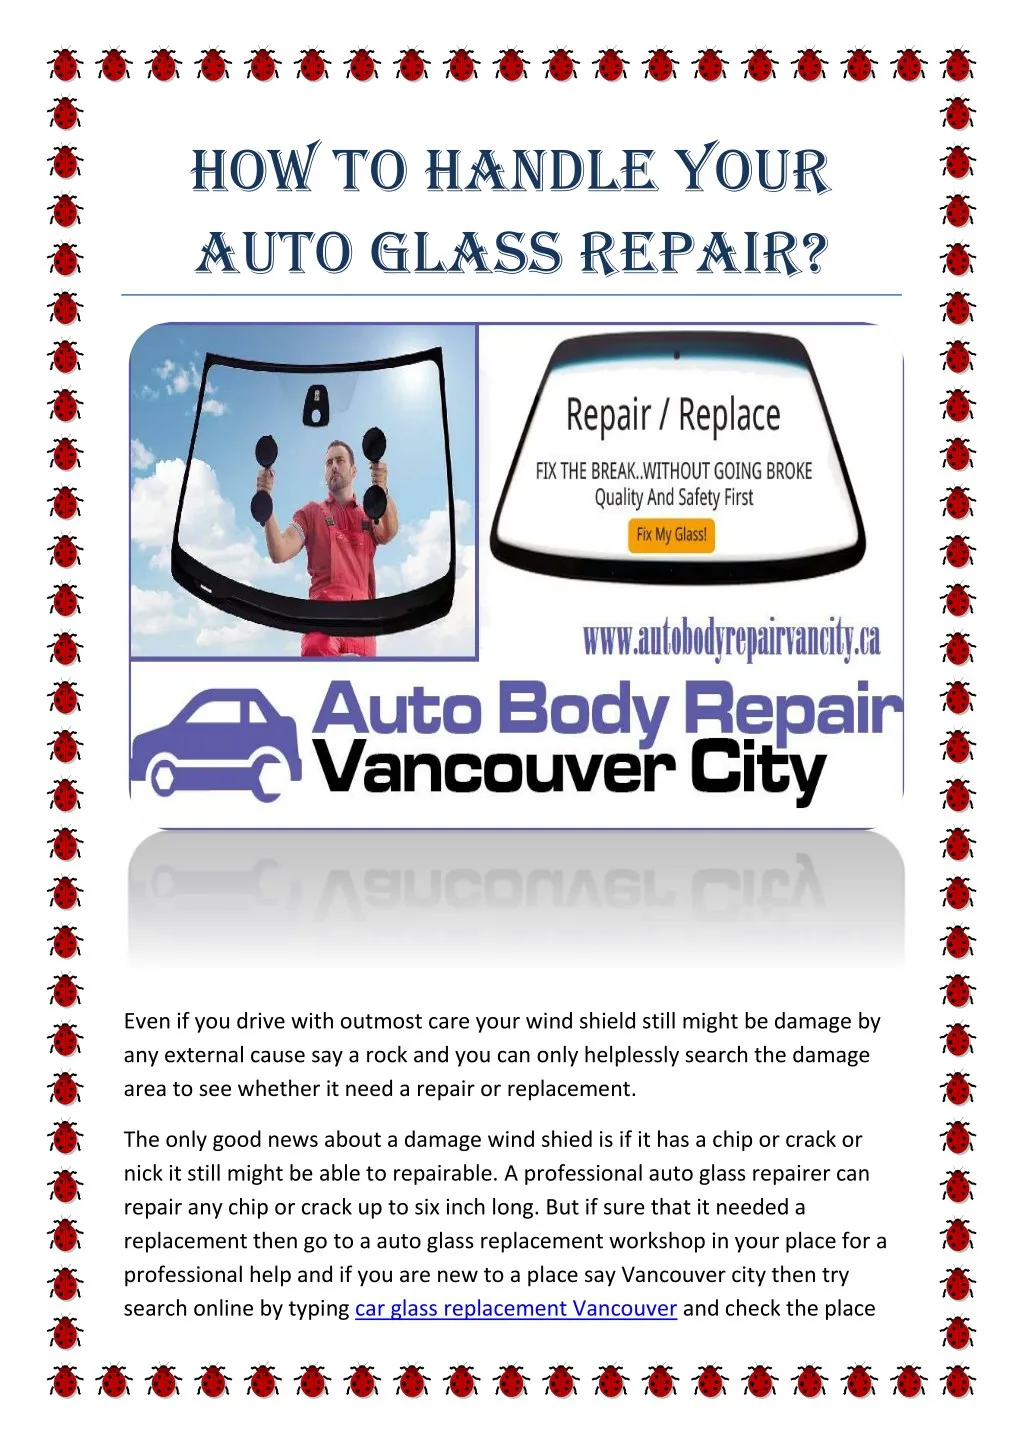 how to handle your auto glass repair